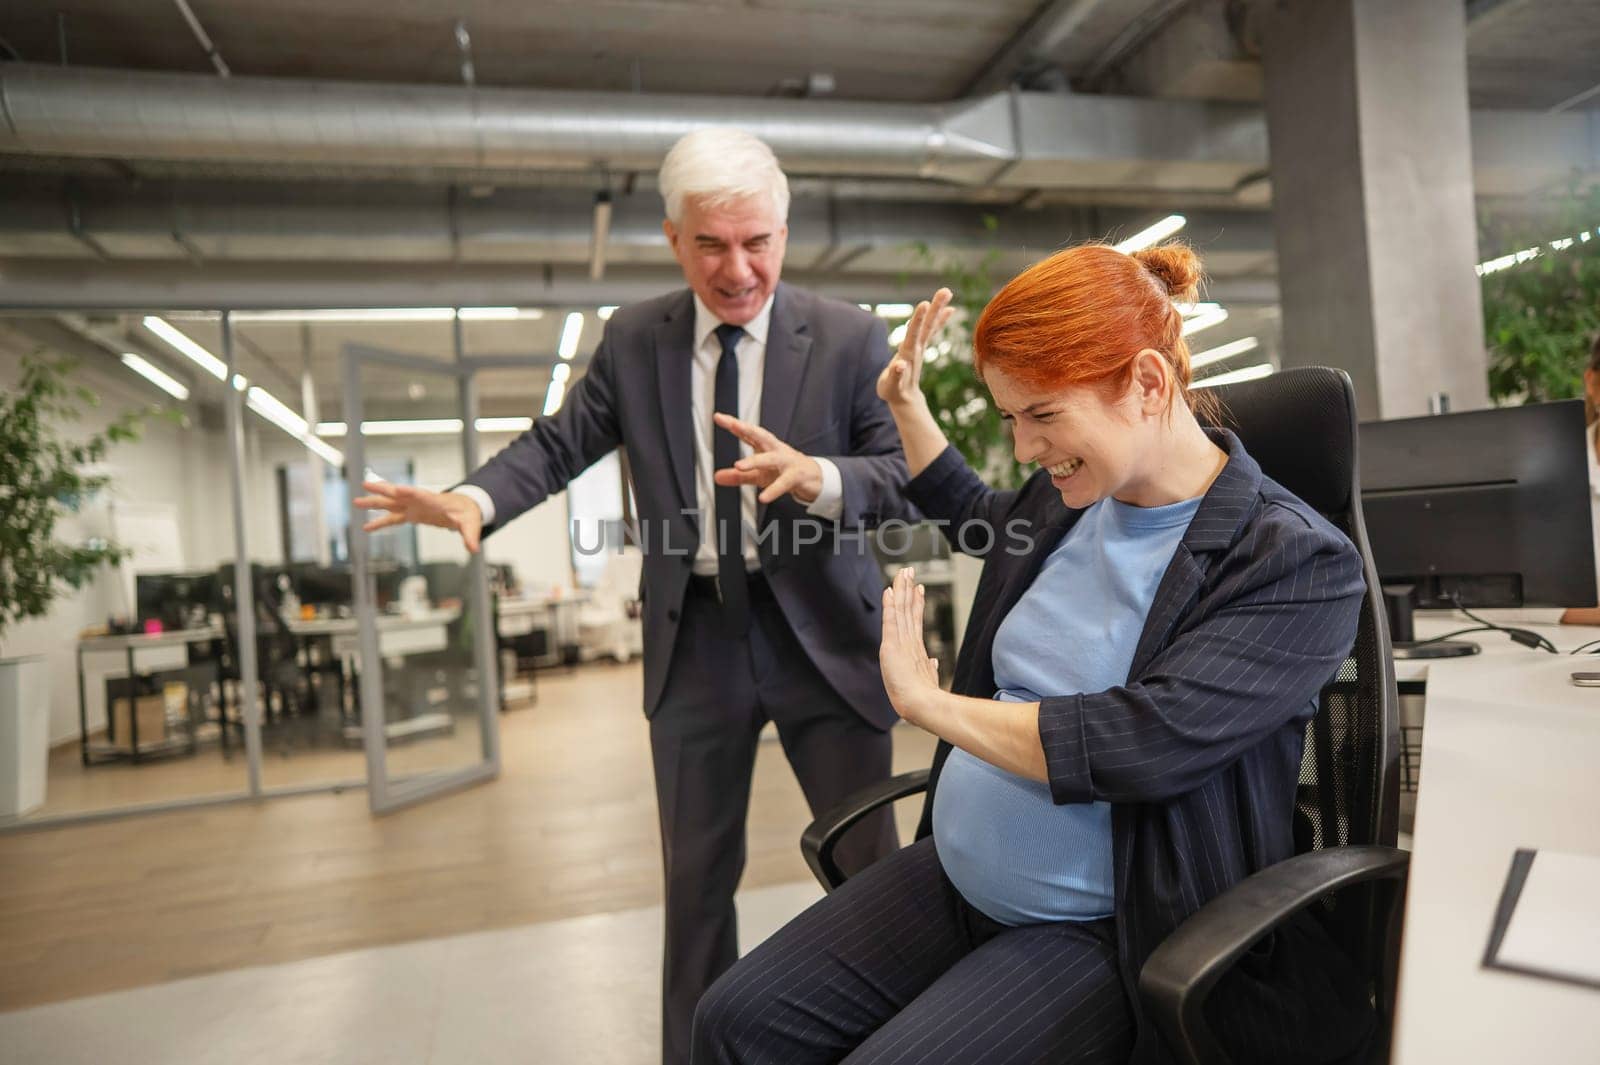 Boss swears at pregnant subordinate woman in office. by mrwed54